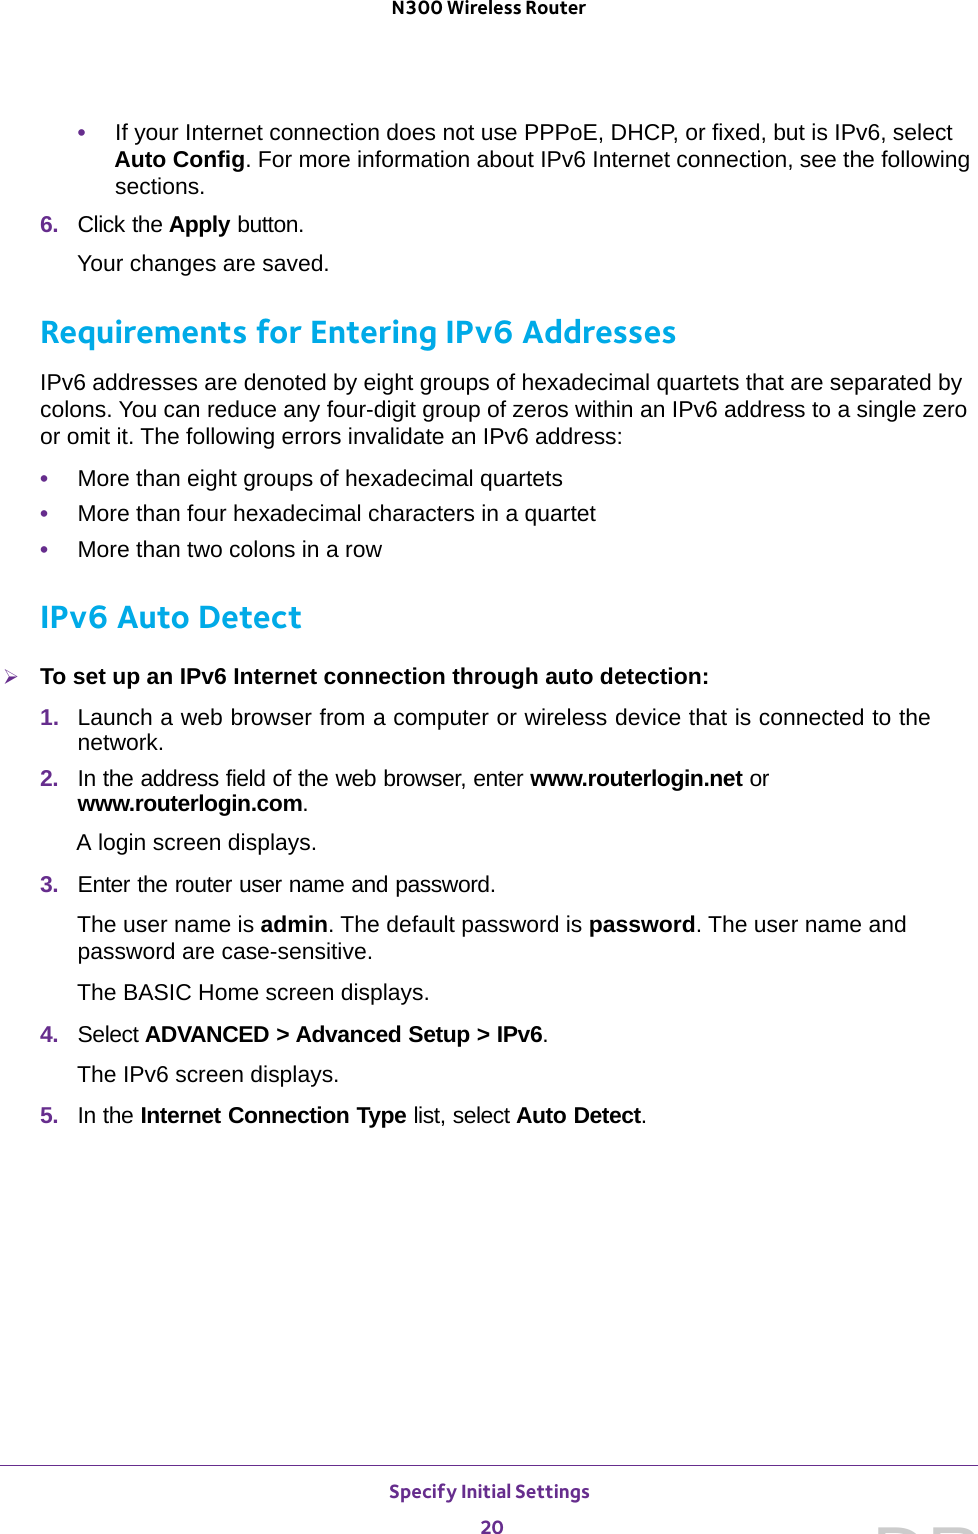 Specify Initial Settings 20N300 Wireless Router •If your Internet connection does not use PPPoE, DHCP, or fixed, but is IPv6, select Auto Config. For more information about IPv6 Internet connection, see the following sections.6.  Click the Apply button.Your changes are saved.Requirements for Entering IPv6 AddressesIPv6 addresses are denoted by eight groups of hexadecimal quartets that are separated by colons. You can reduce any four-digit group of zeros within an IPv6 address to a single zero or omit it. The following errors invalidate an IPv6 address:•More than eight groups of hexadecimal quartets•More than four hexadecimal characters in a quartet•More than two colons in a rowIPv6 Auto DetectTo set up an IPv6 Internet connection through auto detection:1.  Launch a web browser from a computer or wireless device that is connected to the network.2.  In the address field of the web browser, enter www.routerlogin.net or www.routerlogin.com.A login screen displays.3.  Enter the router user name and password.The user name is admin. The default password is password. The user name and password are case-sensitive.The BASIC Home screen displays. 4.  Select ADVANCED &gt; Advanced Setup &gt; IPv6.The IPv6 screen displays.5.  In the Internet Connection Type list, select Auto Detect.DRAFT